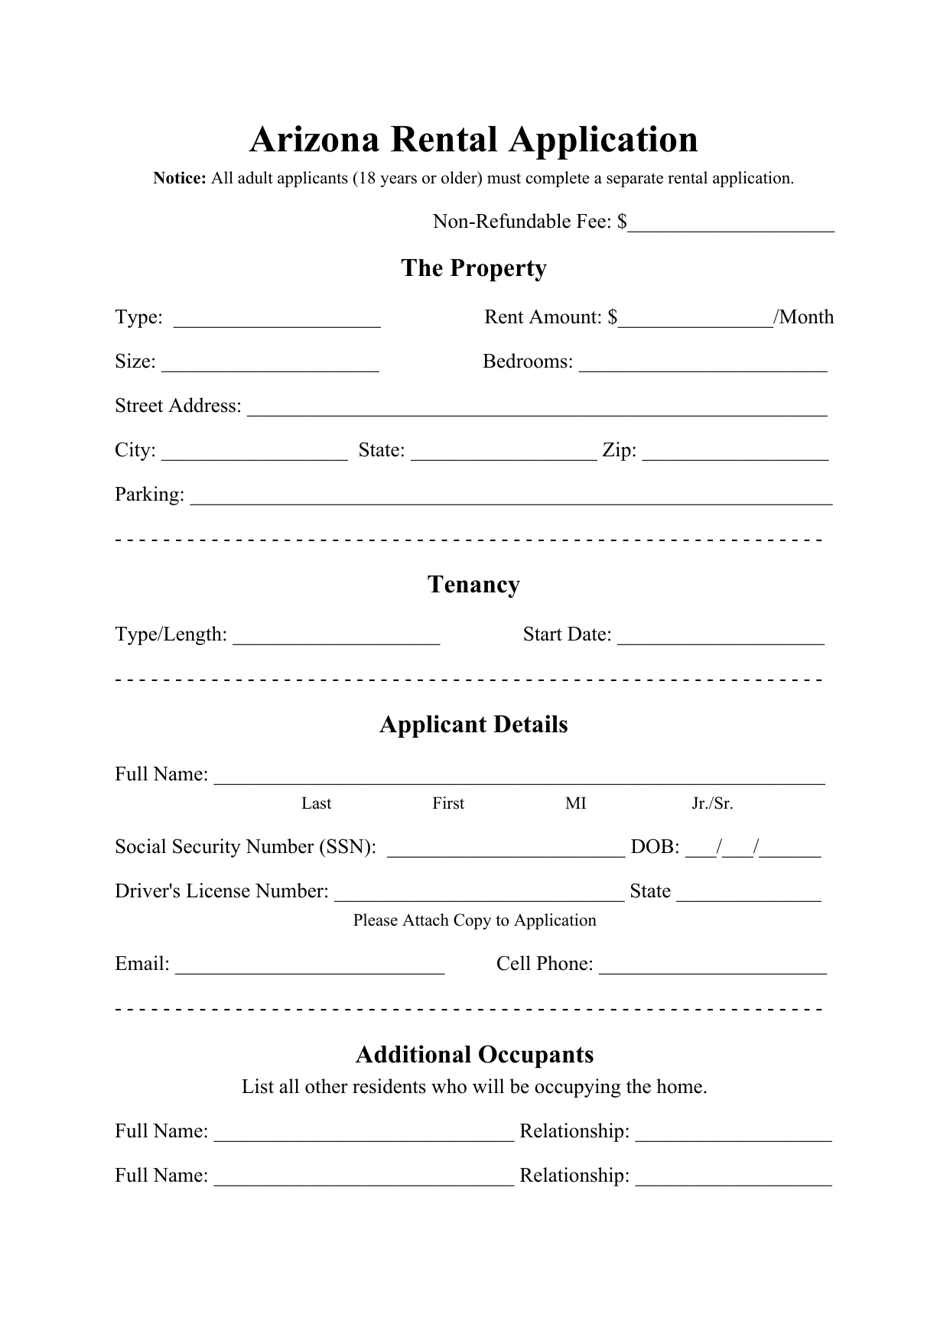 Arizona Rental Application Form Fill Out, Sign Online and Download